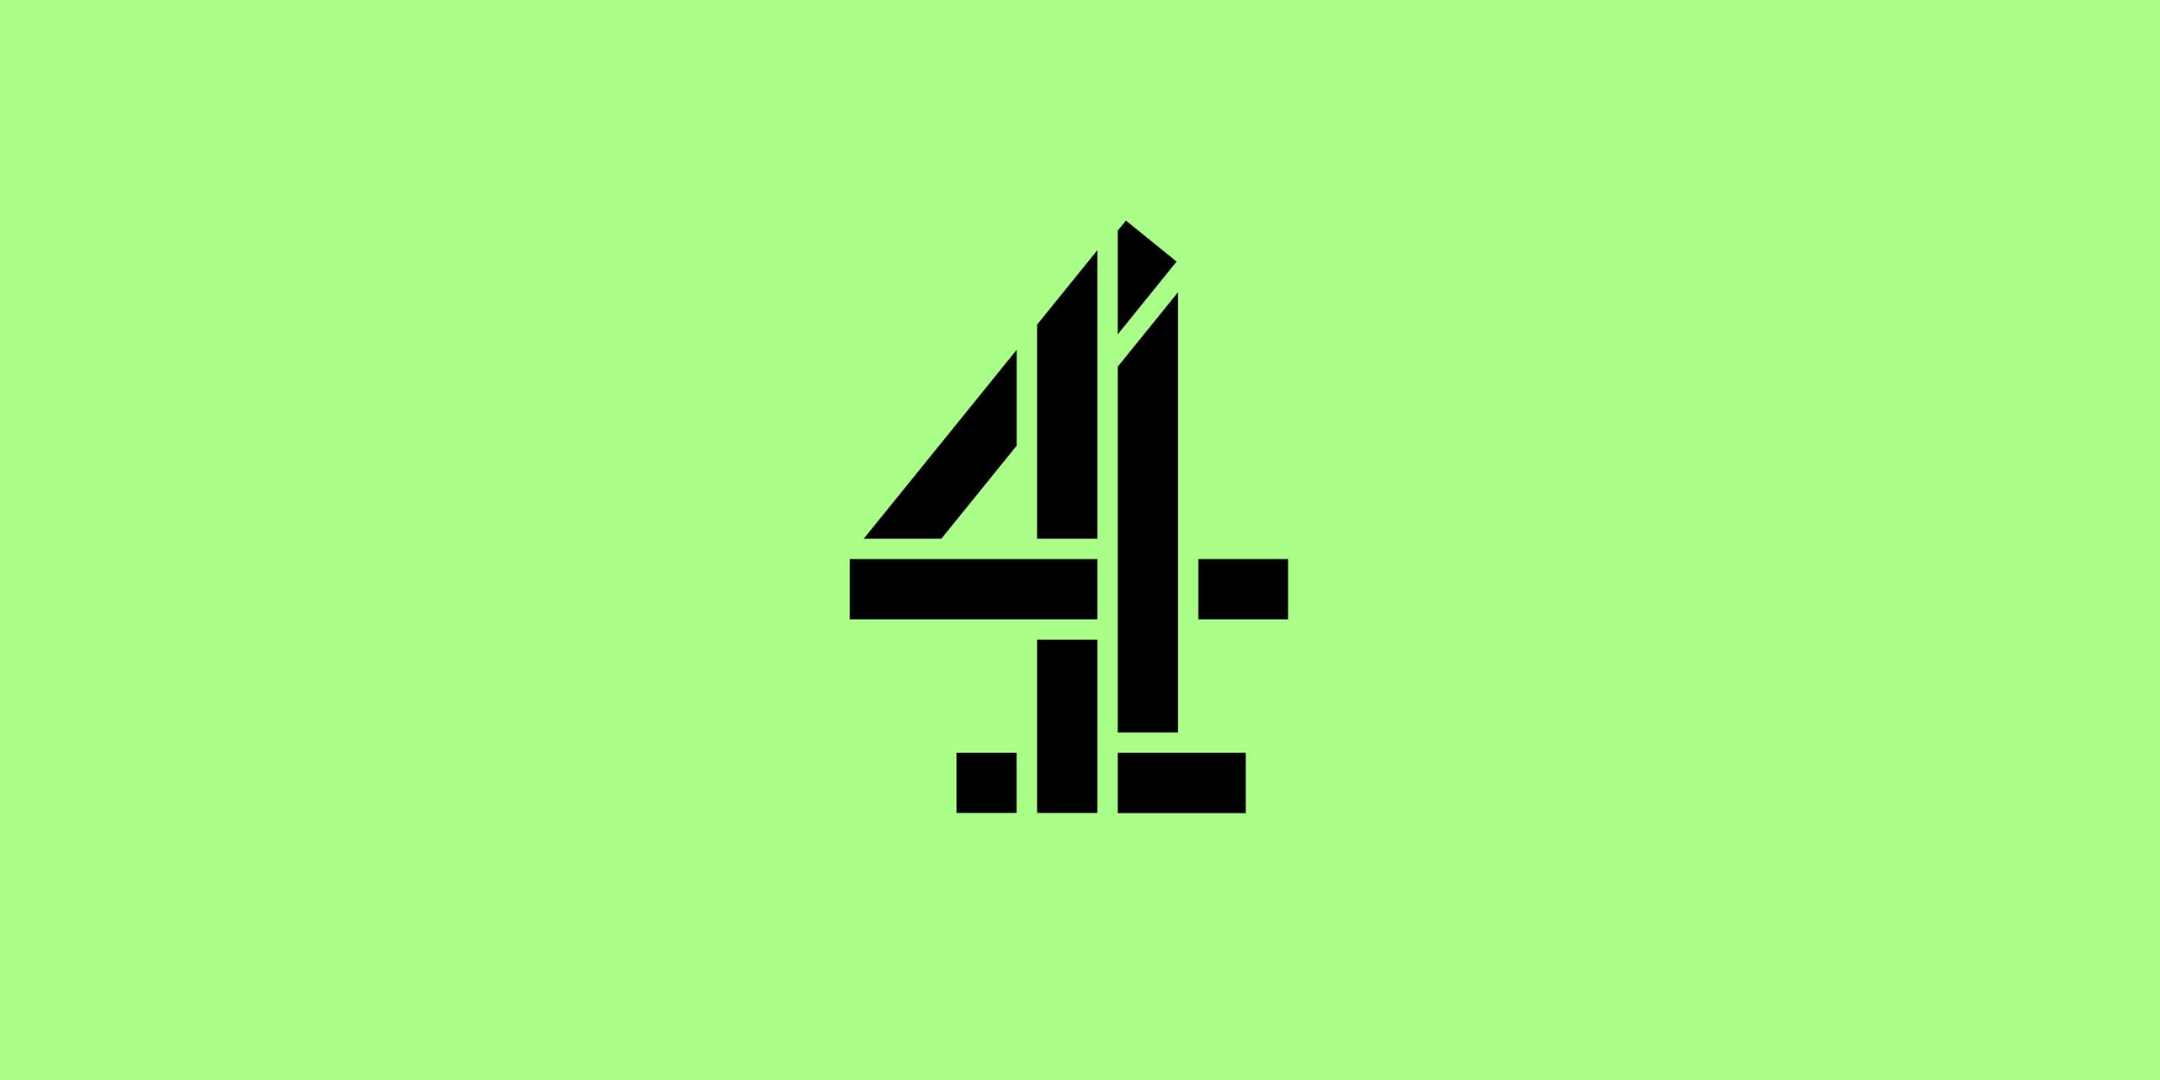 Channel 4 and North East Screen Industries Partnership collaborate to help build the production sector in the North East